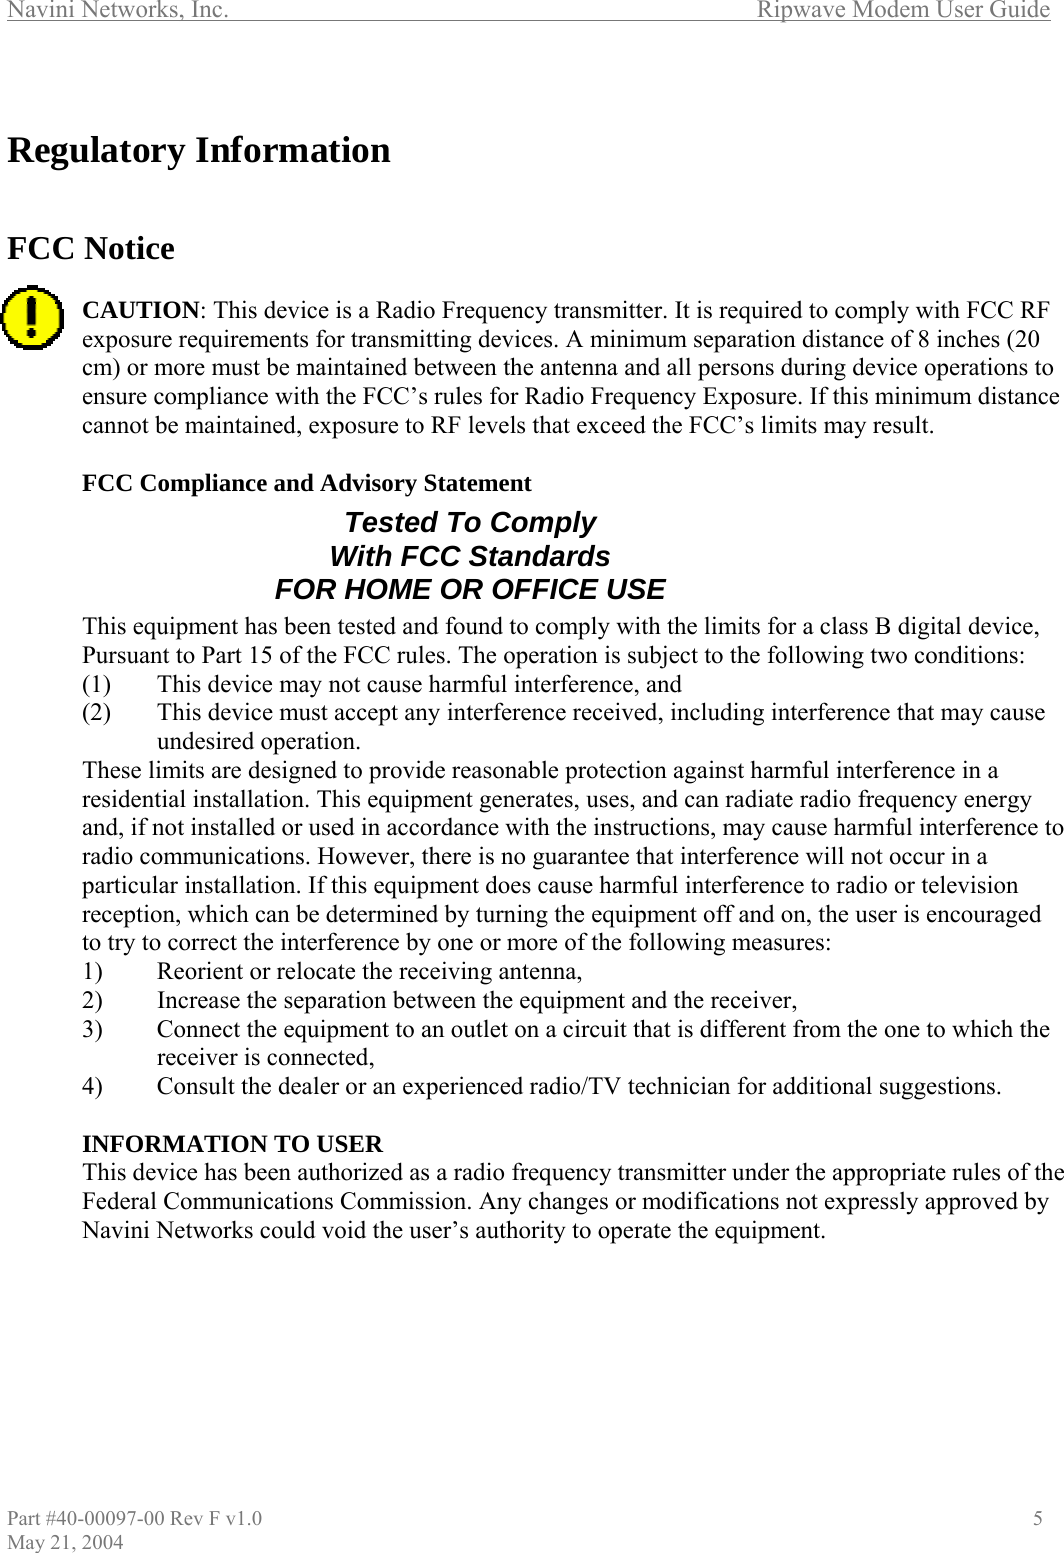 Navini Networks, Inc.        Ripwave Modem User Guide  Regulatory Information   FCC Notice  CAUTION: This device is a Radio Frequency transmitter. It is required to comply with FCC RF exposure requirements for transmitting devices. A minimum separation distance of 8 inches (20 cm) or more must be maintained between the antenna and all persons during device operations to ensure compliance with the FCC’s rules for Radio Frequency Exposure. If this minimum distance cannot be maintained, exposure to RF levels that exceed the FCC’s limits may result.   FCC Compliance and Advisory Statement       This equipment has been tested and found to comply with the limits for a class B digital device, Pursuant to Part 15 of the FCC rules. The operation is subject to the following two conditions: Tested To Comply With FCC Standards FOR HOME OR OFFICE USE(1)  This device may not cause harmful interference, and (2)  This device must accept any interference received, including interference that may cause undesired operation. These limits are designed to provide reasonable protection against harmful interference in a residential installation. This equipment generates, uses, and can radiate radio frequency energy and, if not installed or used in accordance with the instructions, may cause harmful interference to radio communications. However, there is no guarantee that interference will not occur in a particular installation. If this equipment does cause harmful interference to radio or television reception, which can be determined by turning the equipment off and on, the user is encouraged to try to correct the interference by one or more of the following measures: 1)  Reorient or relocate the receiving antenna, 2)  Increase the separation between the equipment and the receiver, 3)  Connect the equipment to an outlet on a circuit that is different from the one to which the receiver is connected, 4)  Consult the dealer or an experienced radio/TV technician for additional suggestions.  INFORMATION TO USER This device has been authorized as a radio frequency transmitter under the appropriate rules of the Federal Communications Commission. Any changes or modifications not expressly approved by Navini Networks could void the user’s authority to operate the equipment. Part #40-00097-00 Rev F v1.0                                          5 May 21, 2004 